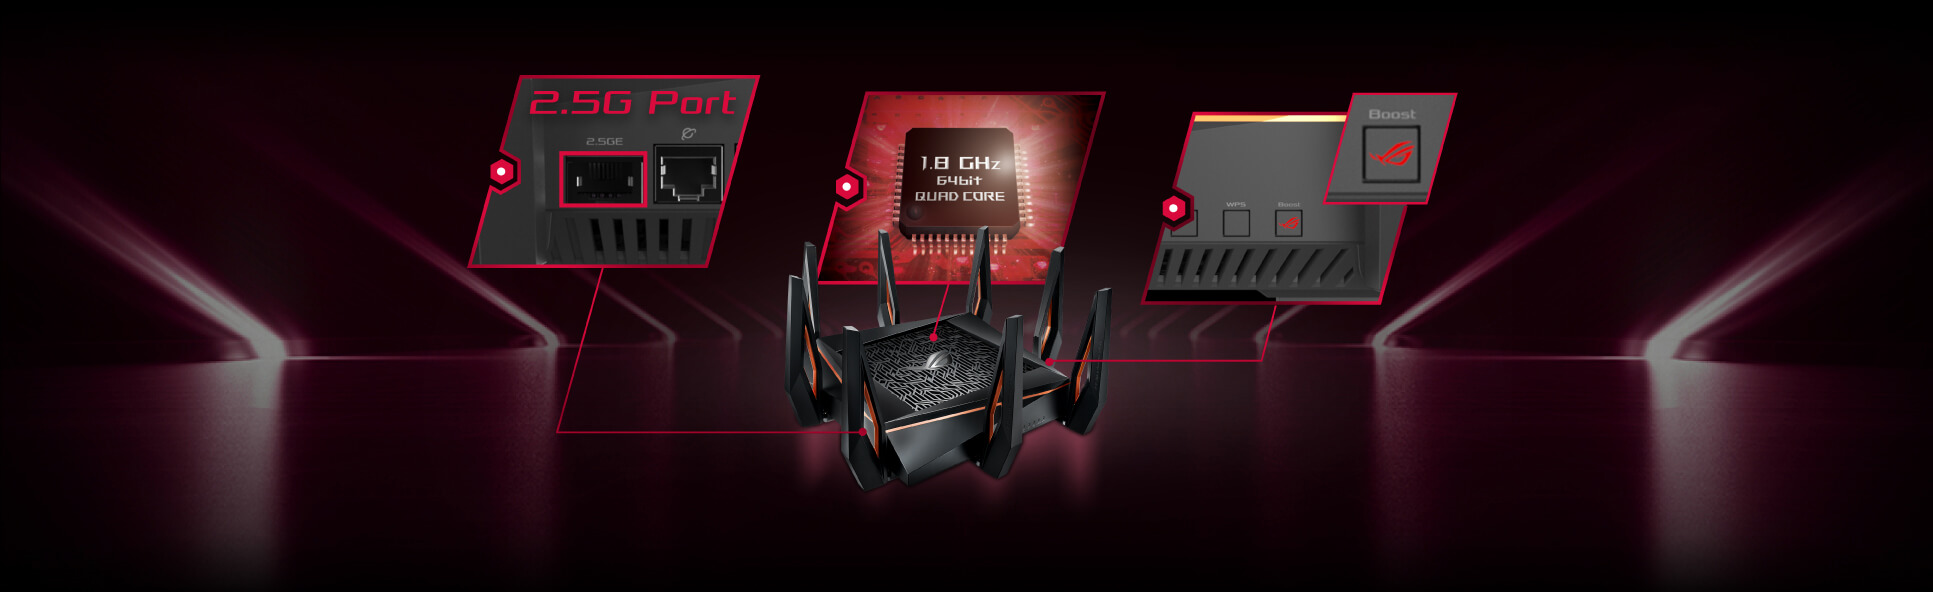 ROG Rapture GT-AX11000 | Gaming networking｜ROG - Republic of